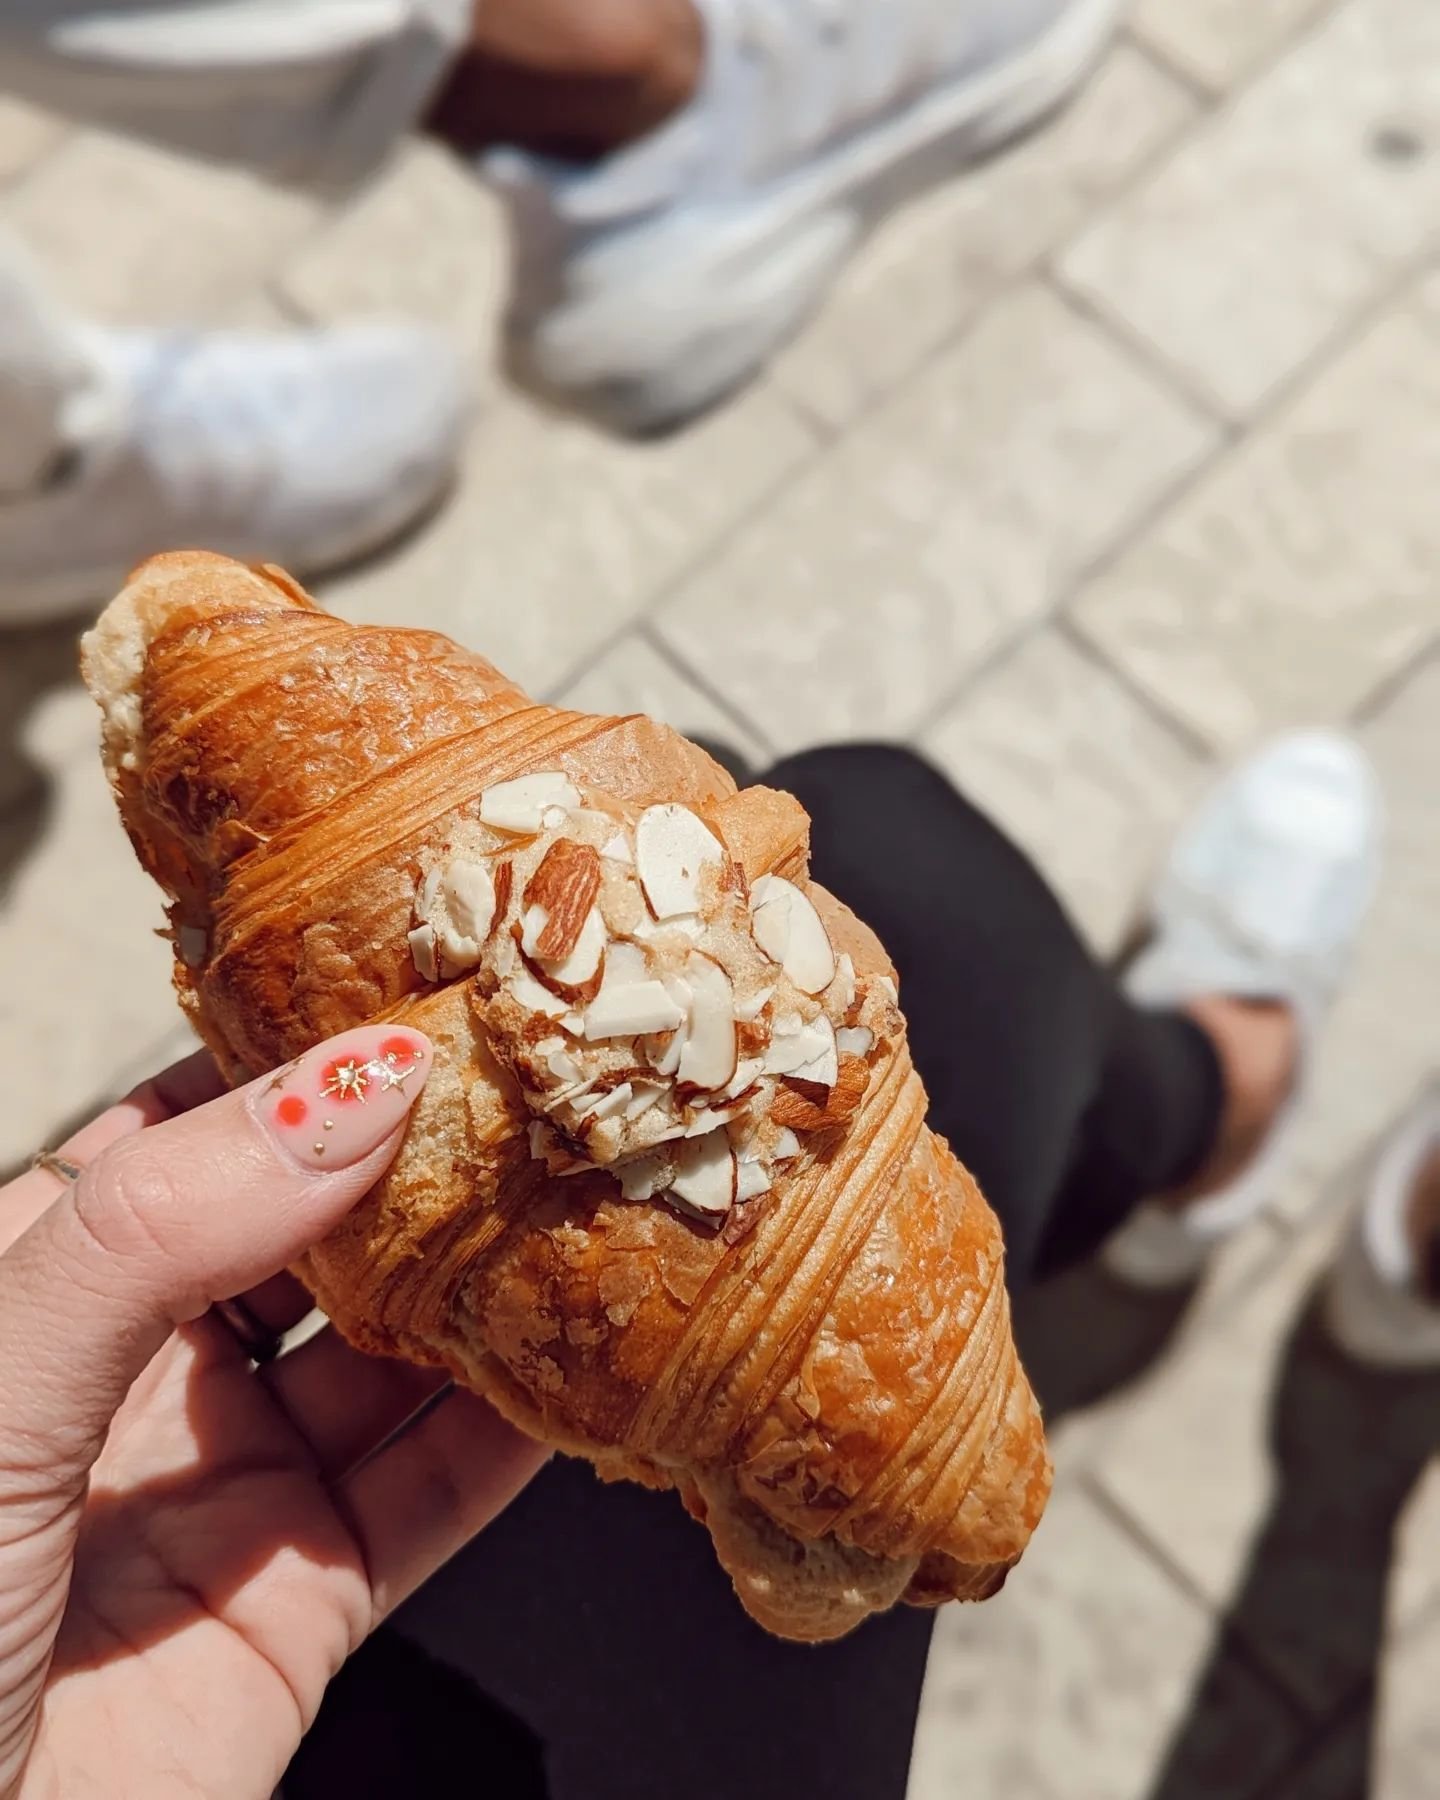 a mentor told me to &quot;negotiate with familiarity&quot; last month, and i took that to mean trying more croissant aux amandes instead of pain au chocolat 😝

and beyond that, i have been trying to choose the opposite of my usual, or just something